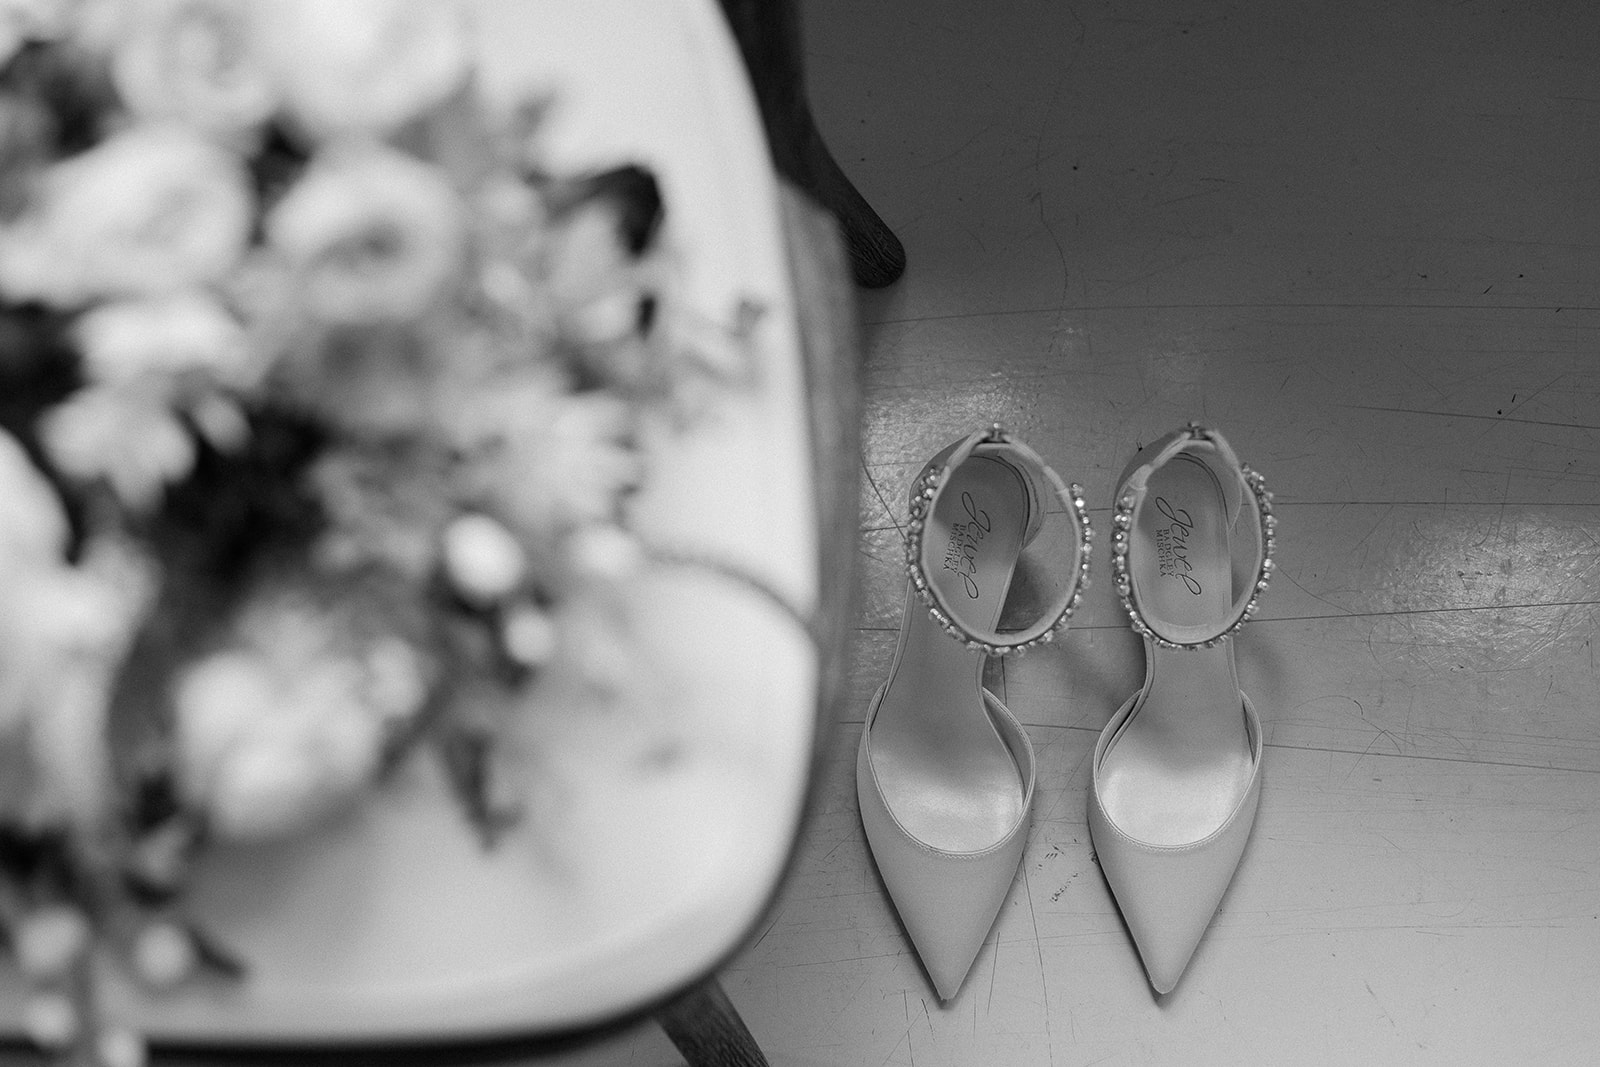 Timeless wedding details captured by Raleigh wedding photographers and videographers.